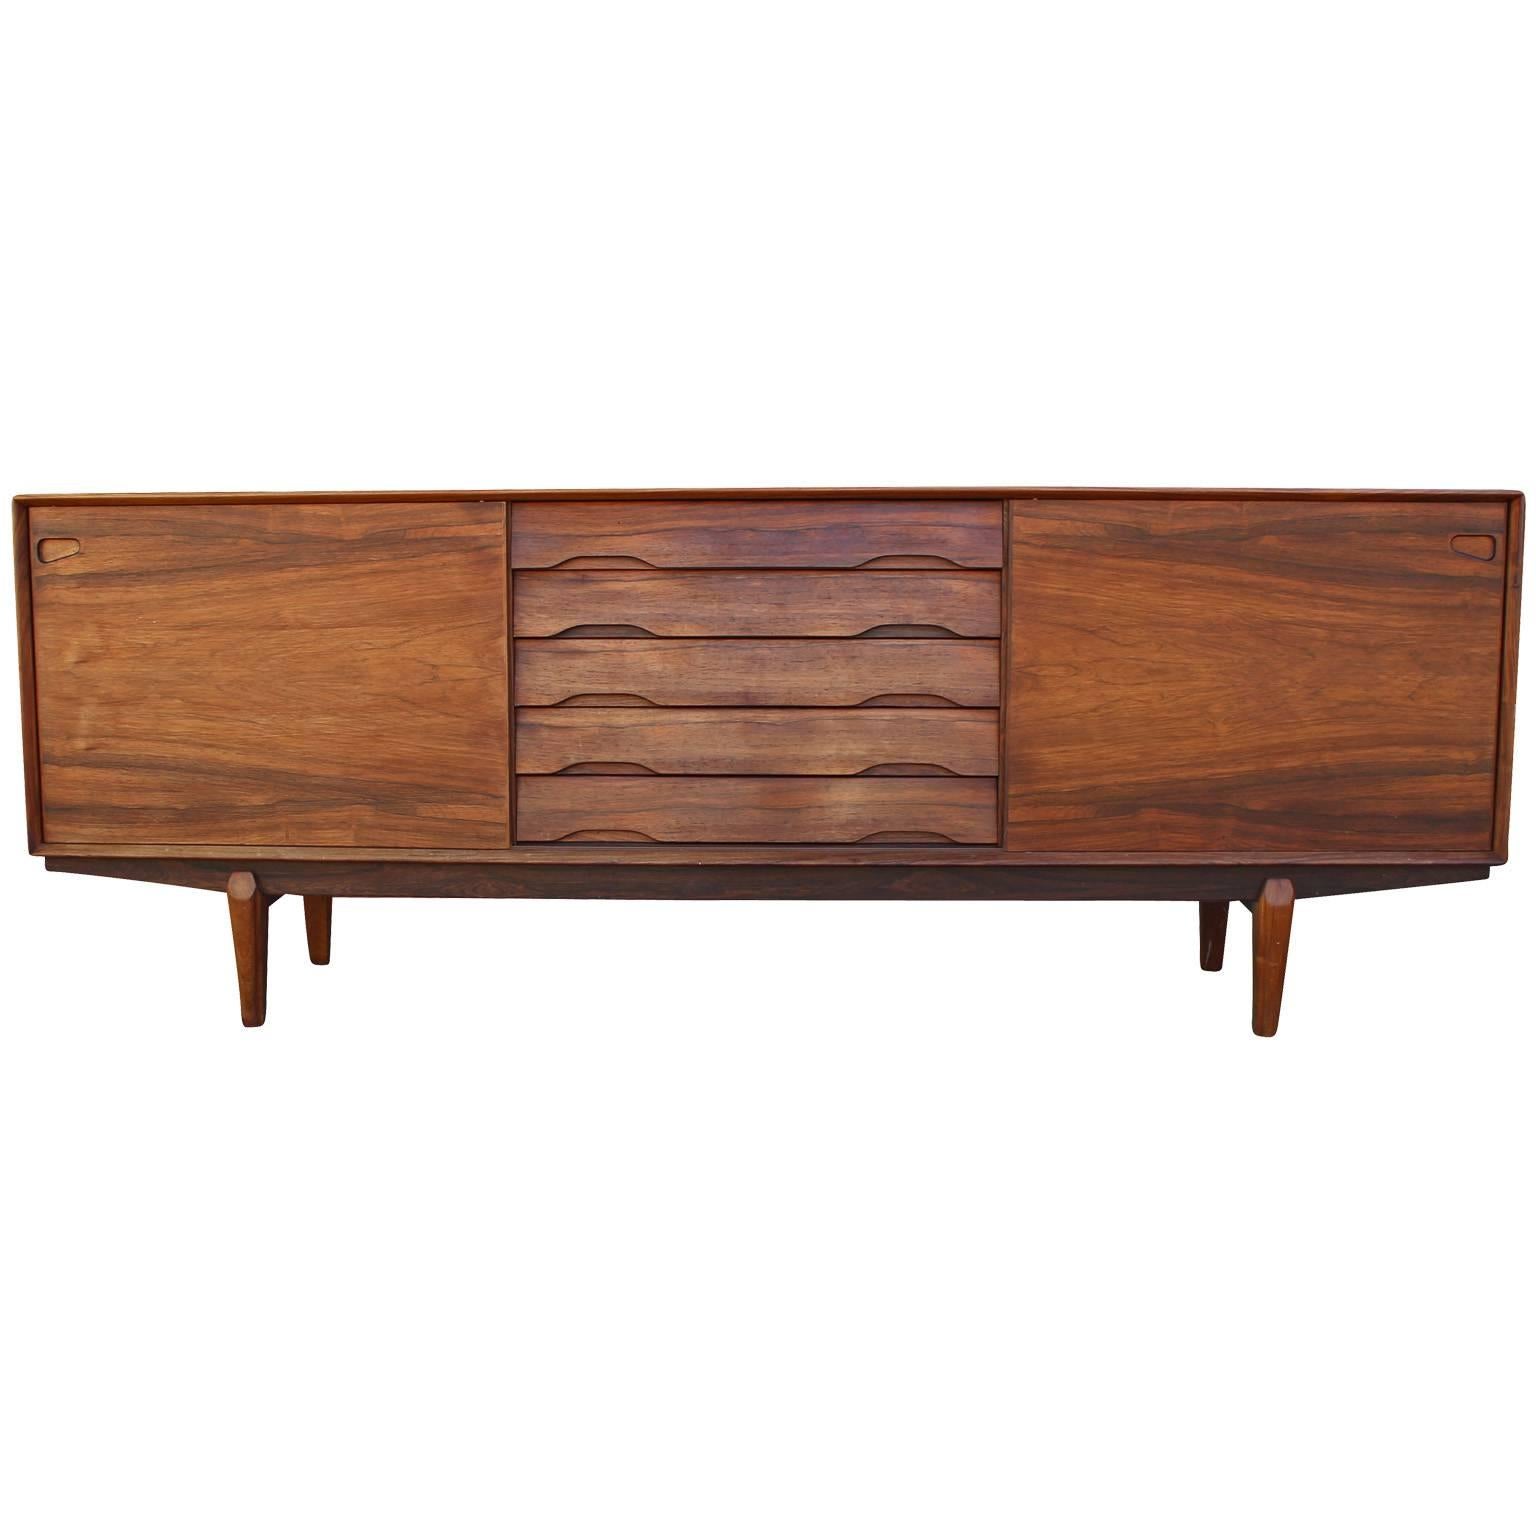 Wonderful credenza and hutch by Skovby. Rosewood has a dramatic grain. Hutch lifts off credenza. Credenza has two sliding doors and five drawers. Sliding doors open up to adjustable shelving. Top of five drawers is lined in green felt and slotted